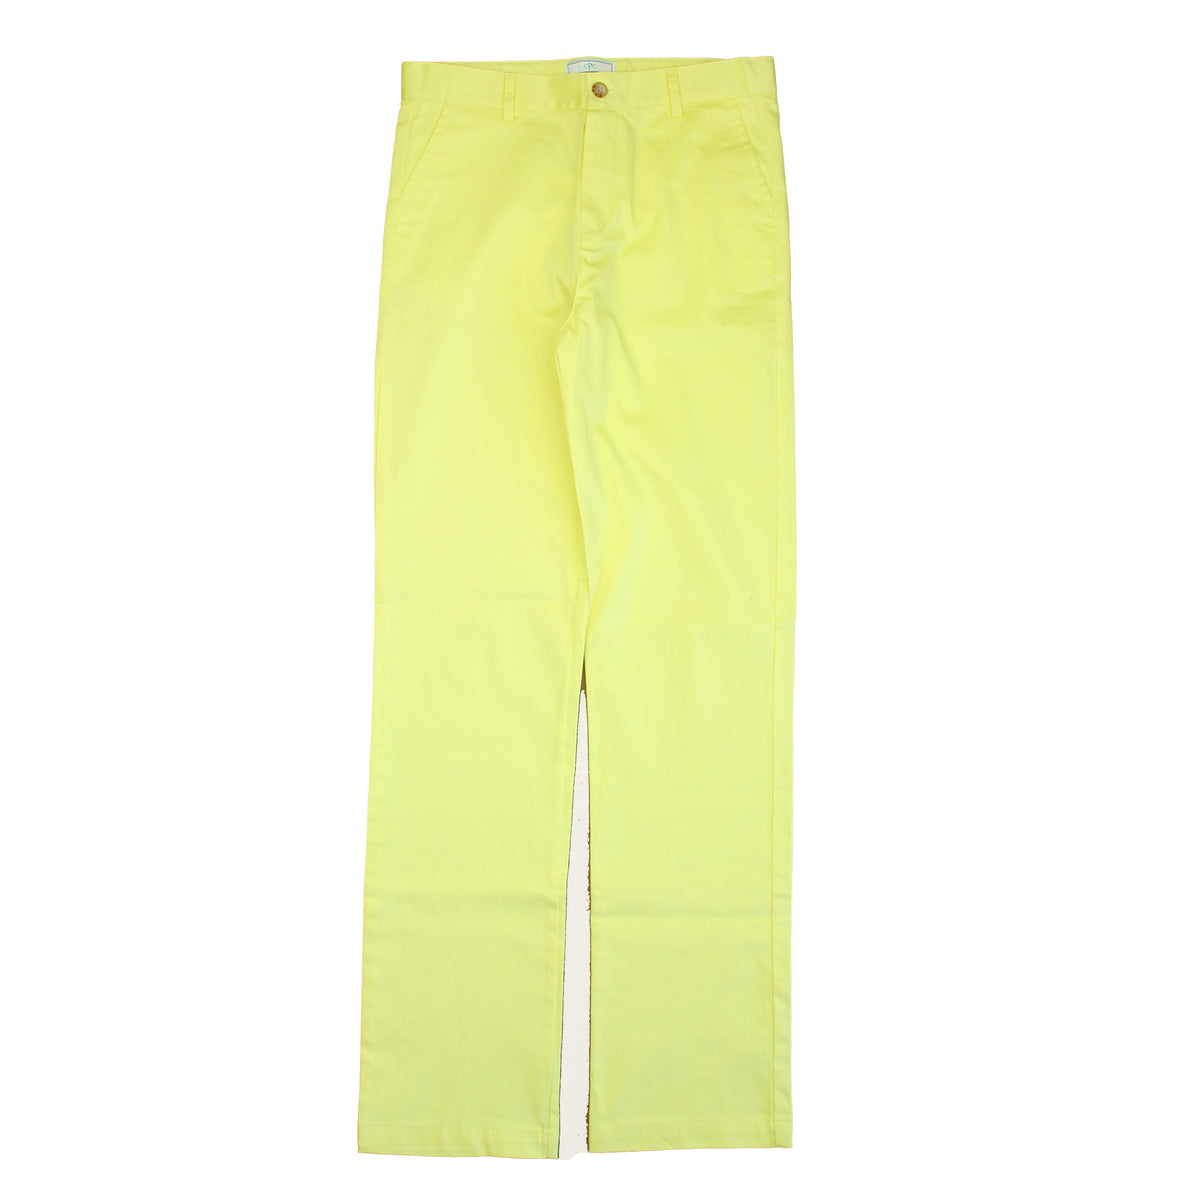 New with Tags: Limelight Yellow Pants size: 2-5T -- FINAL SALE